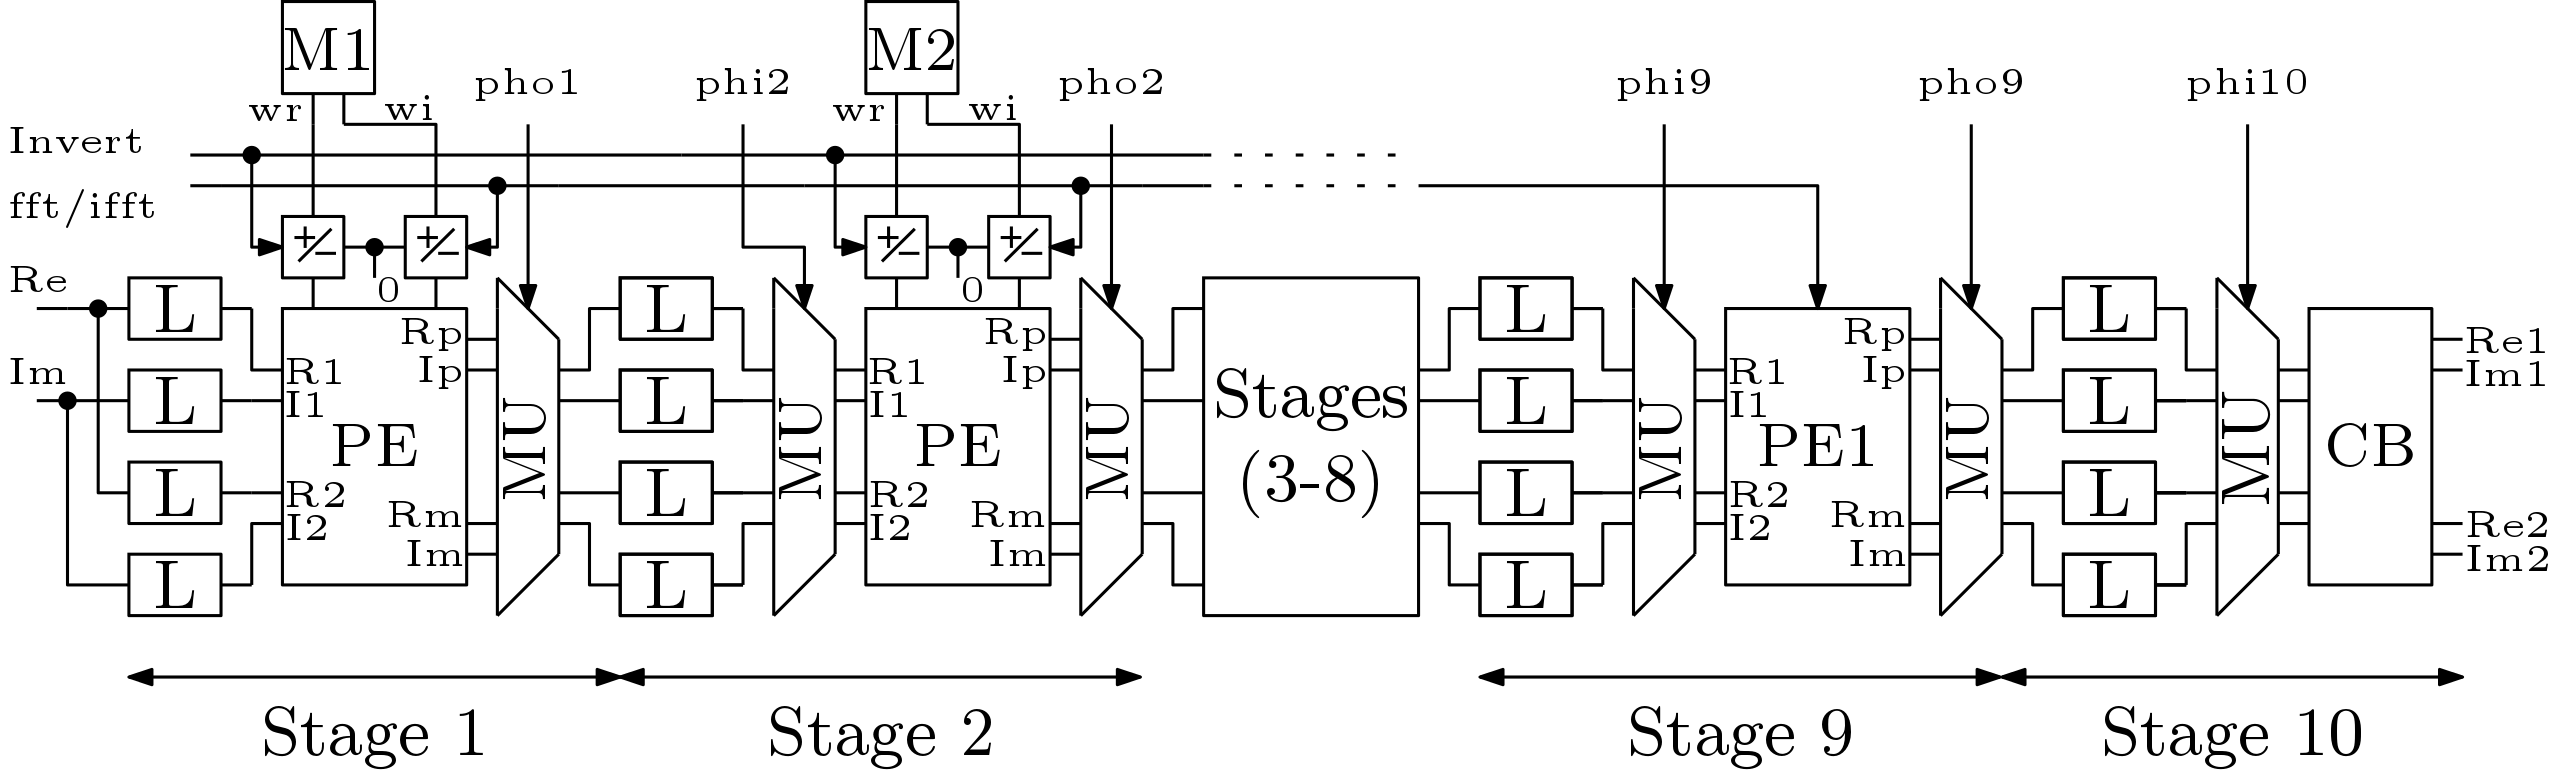 FPGA Implementation of 1024-point FFT/IFFT Processor